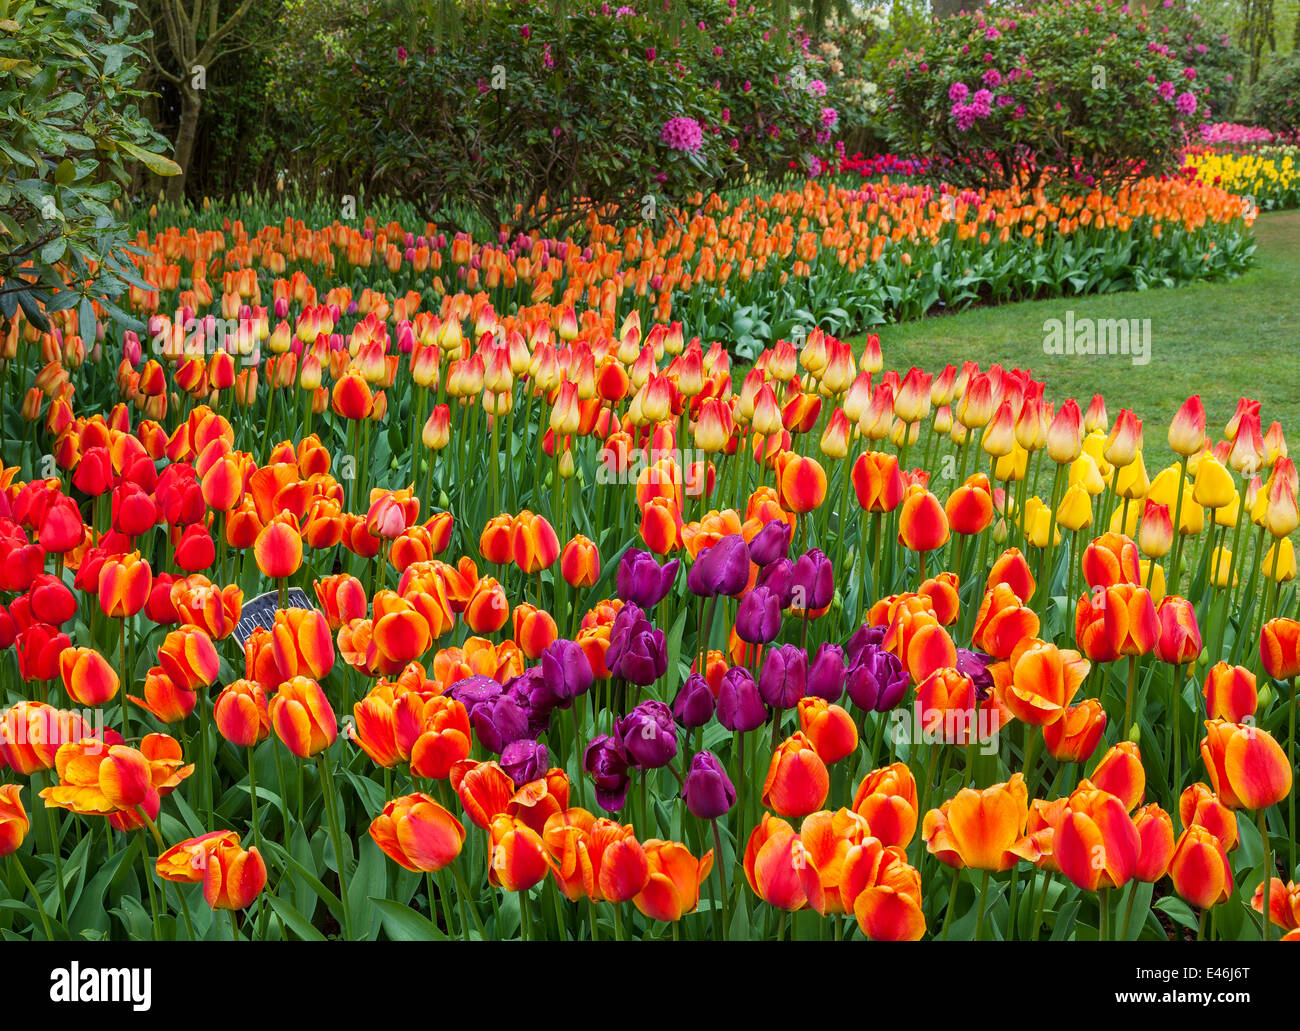 Skagit County, WA: Assorted varieties of flowering tulips form colorful patterns in the RoozenGaarde garden. Stock Photo